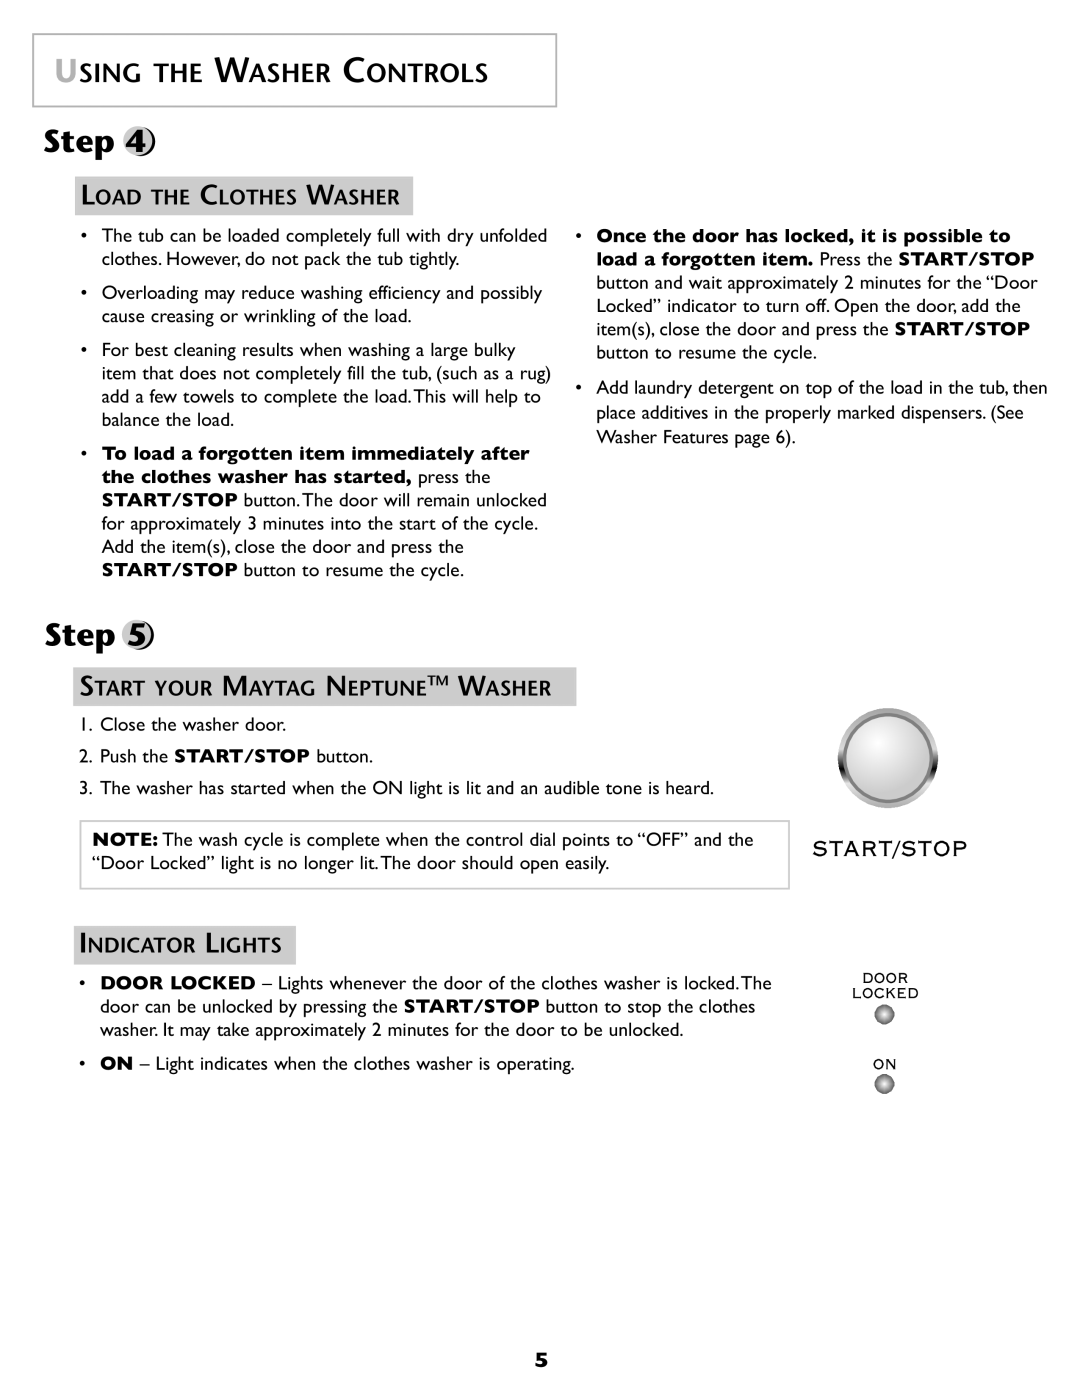 Maytag SL-3 important safety instructions Load The Clothes Washer, Indicator Lights, Step, Using The Washer Controls 